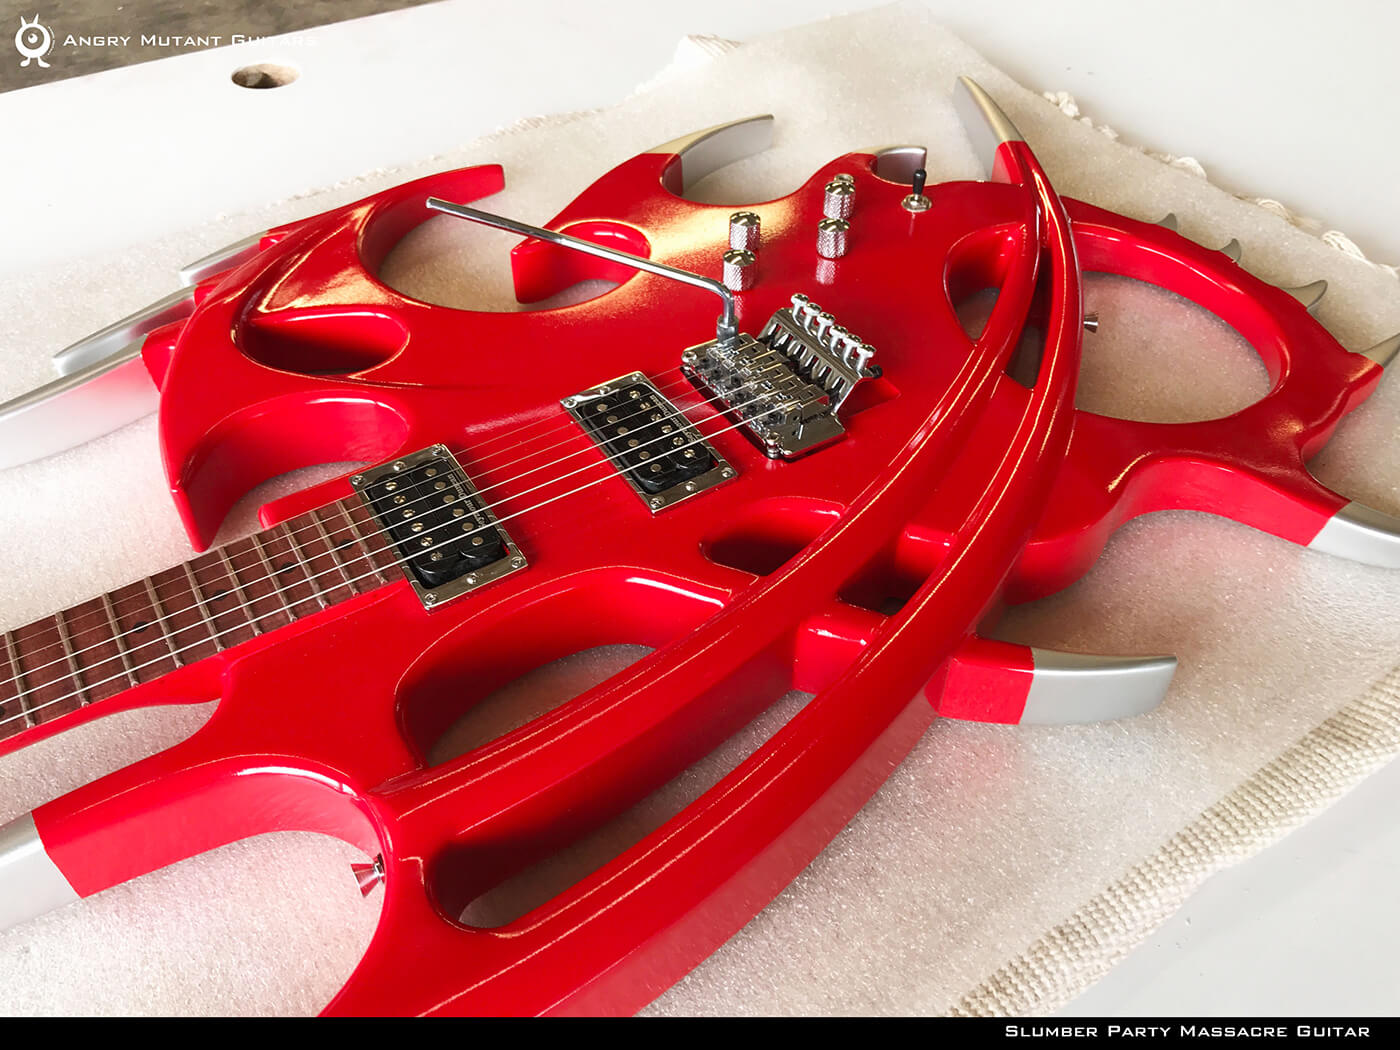 Slumber Party Massacre II guitar, version 4, photo by Angry Mutant